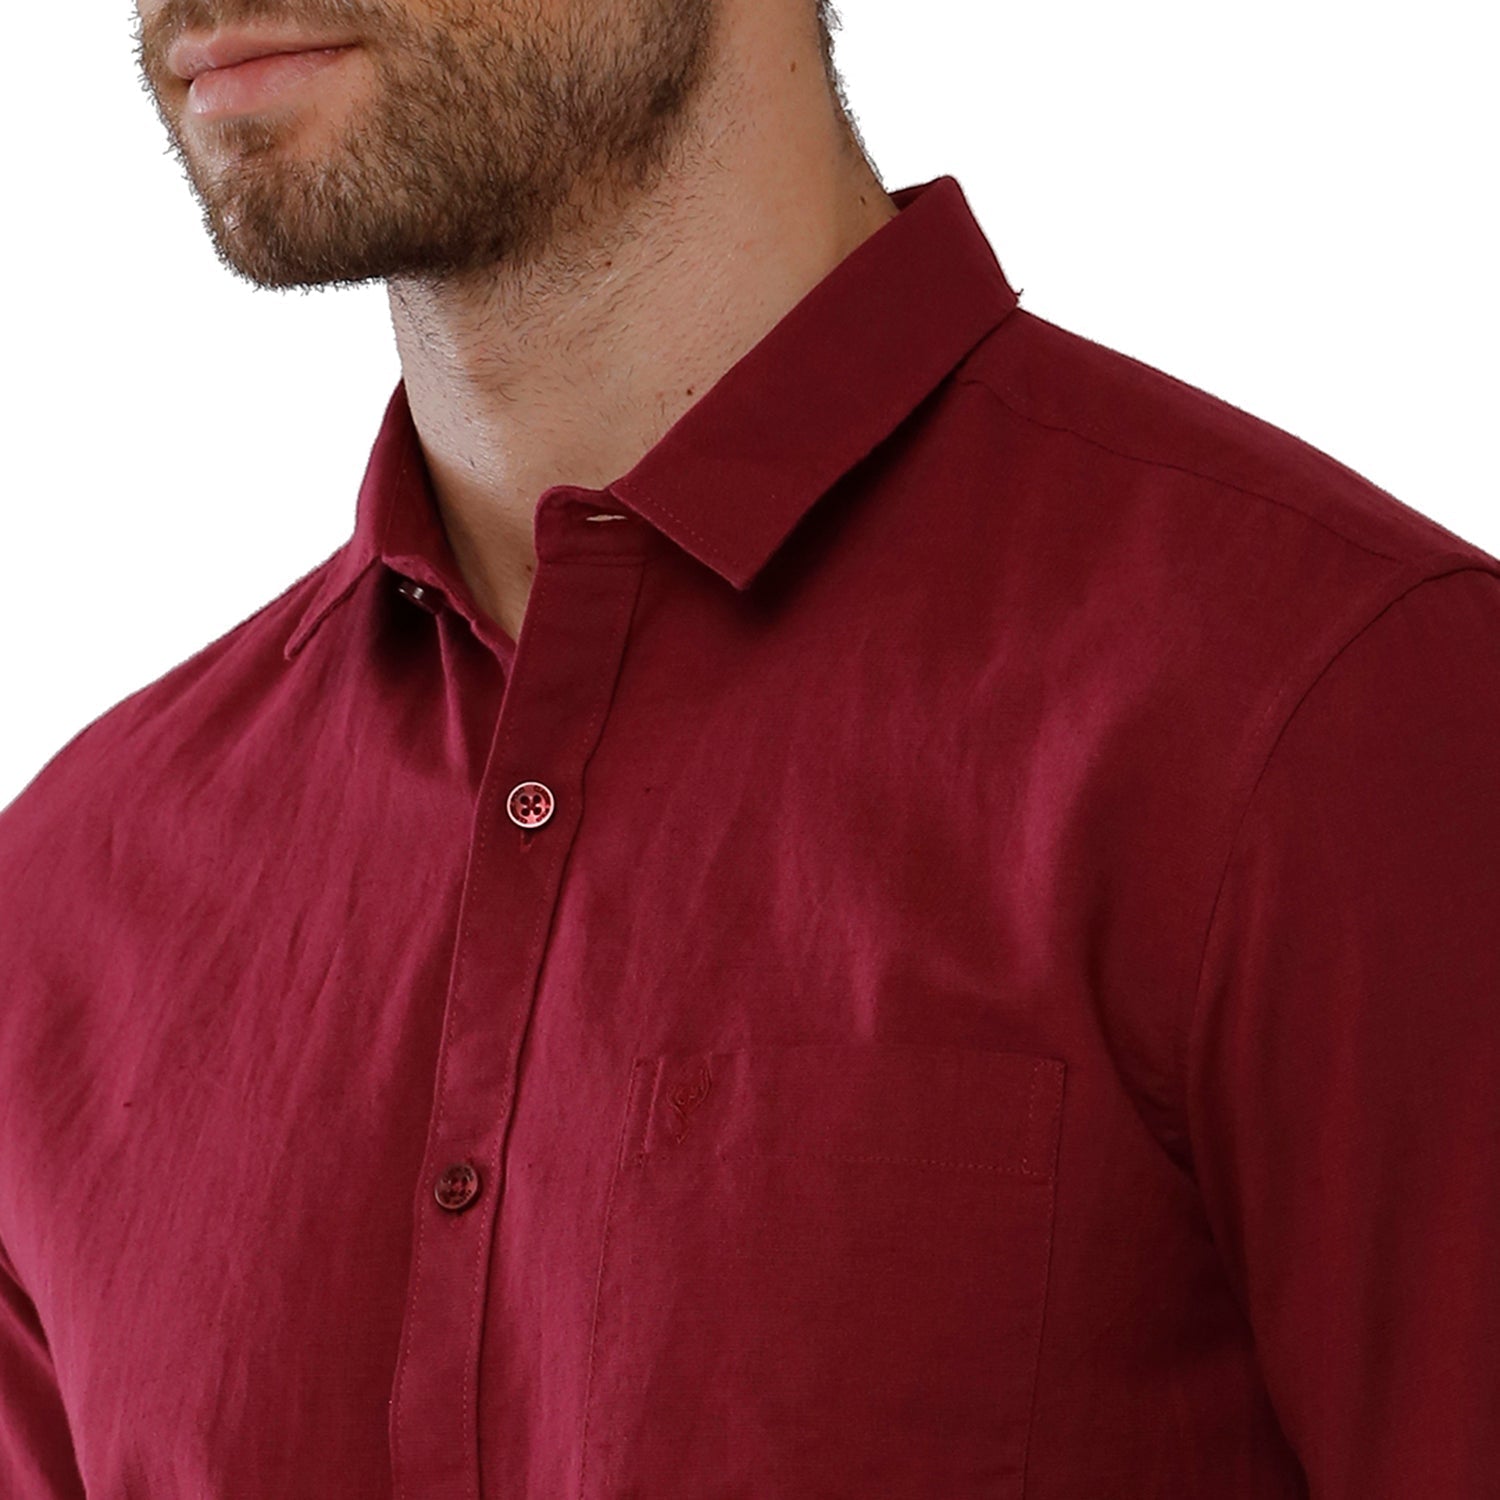 Classic Polo Mens 100% Cotton Solid Milano Fit Maroon Color Woven Shirt - Mica Maroon FS Classic Polo 